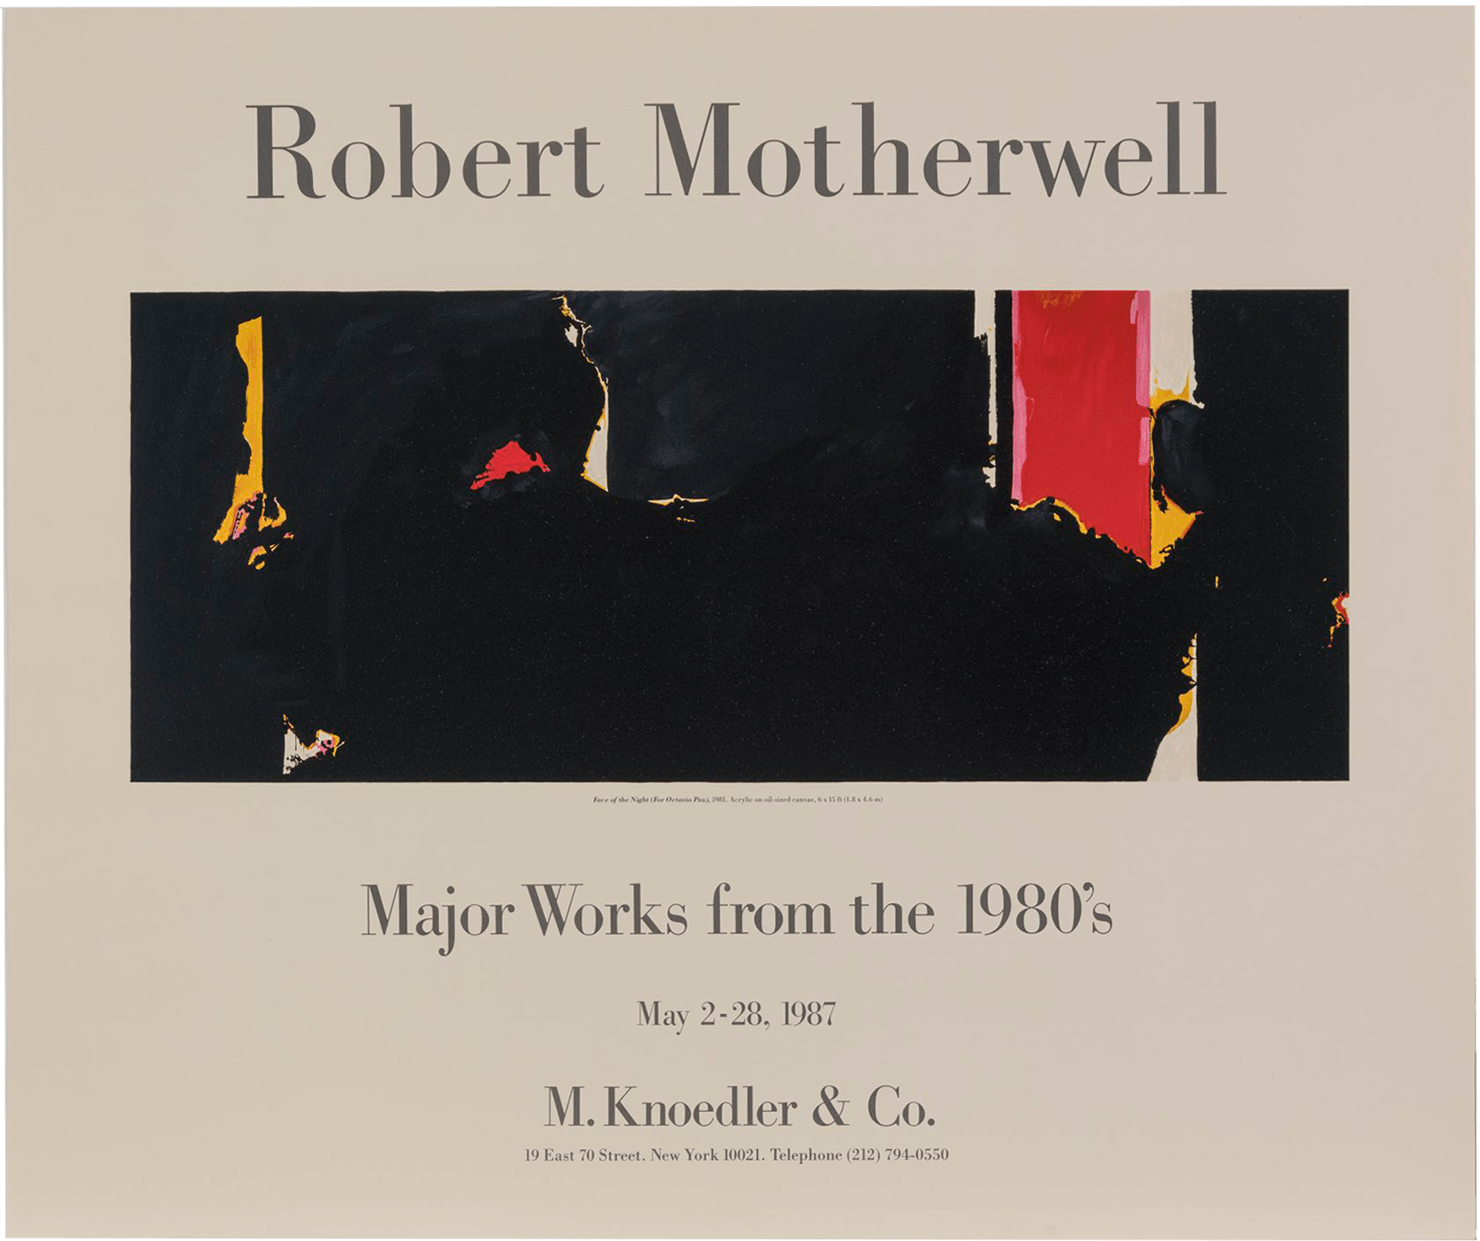 Poster for the exhibition Robert Motherwell: Major Works from the '80s, 1987. Features gray text and an image of Motherwell's painting "Face of the Night (for Octavio Paz)" on an off-white background.